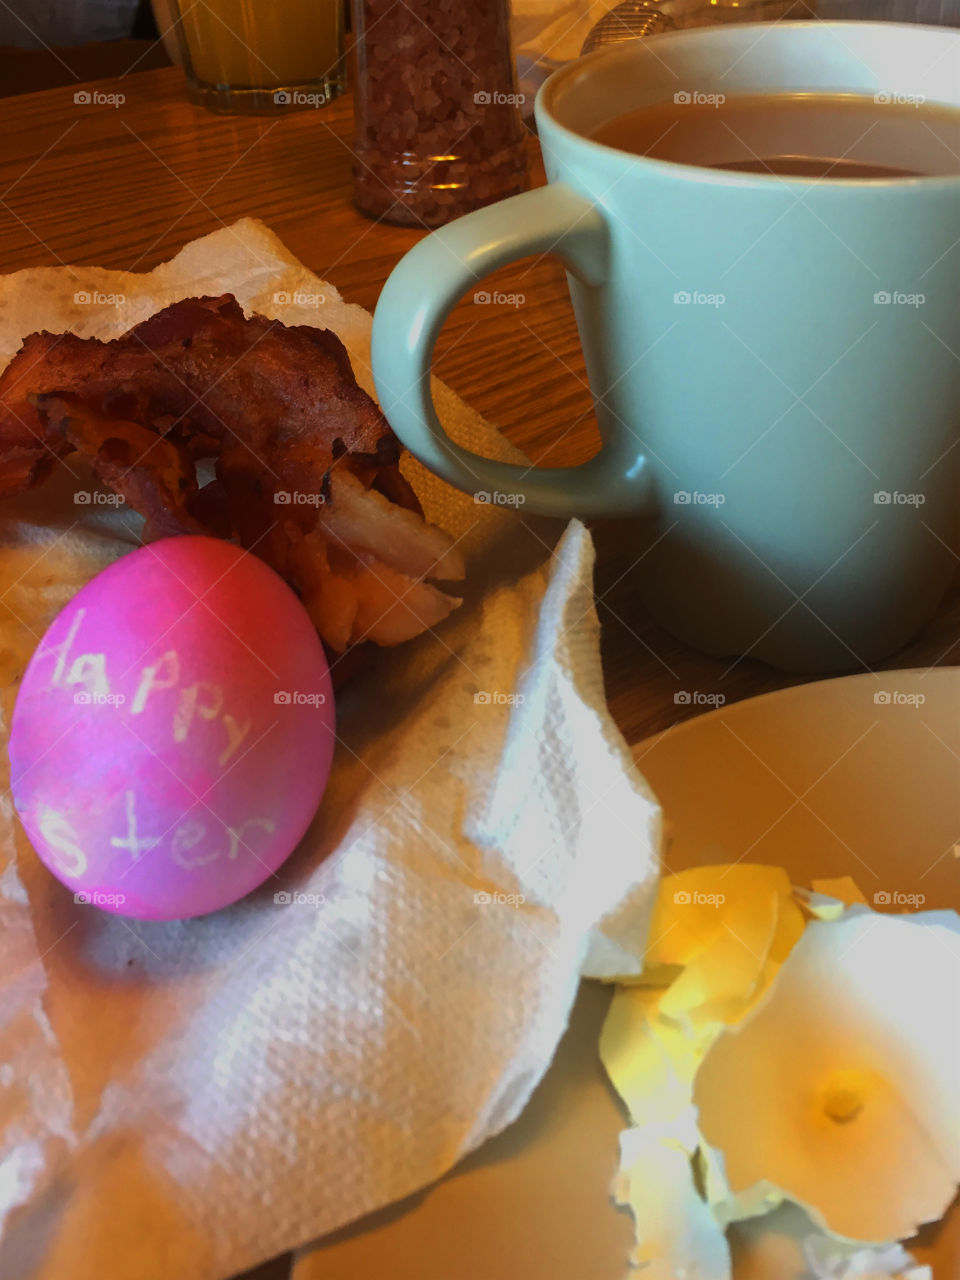 The perfect Easter breakfast- fresh coffee, Easter eggs, bacon spent in the loving company of my family!